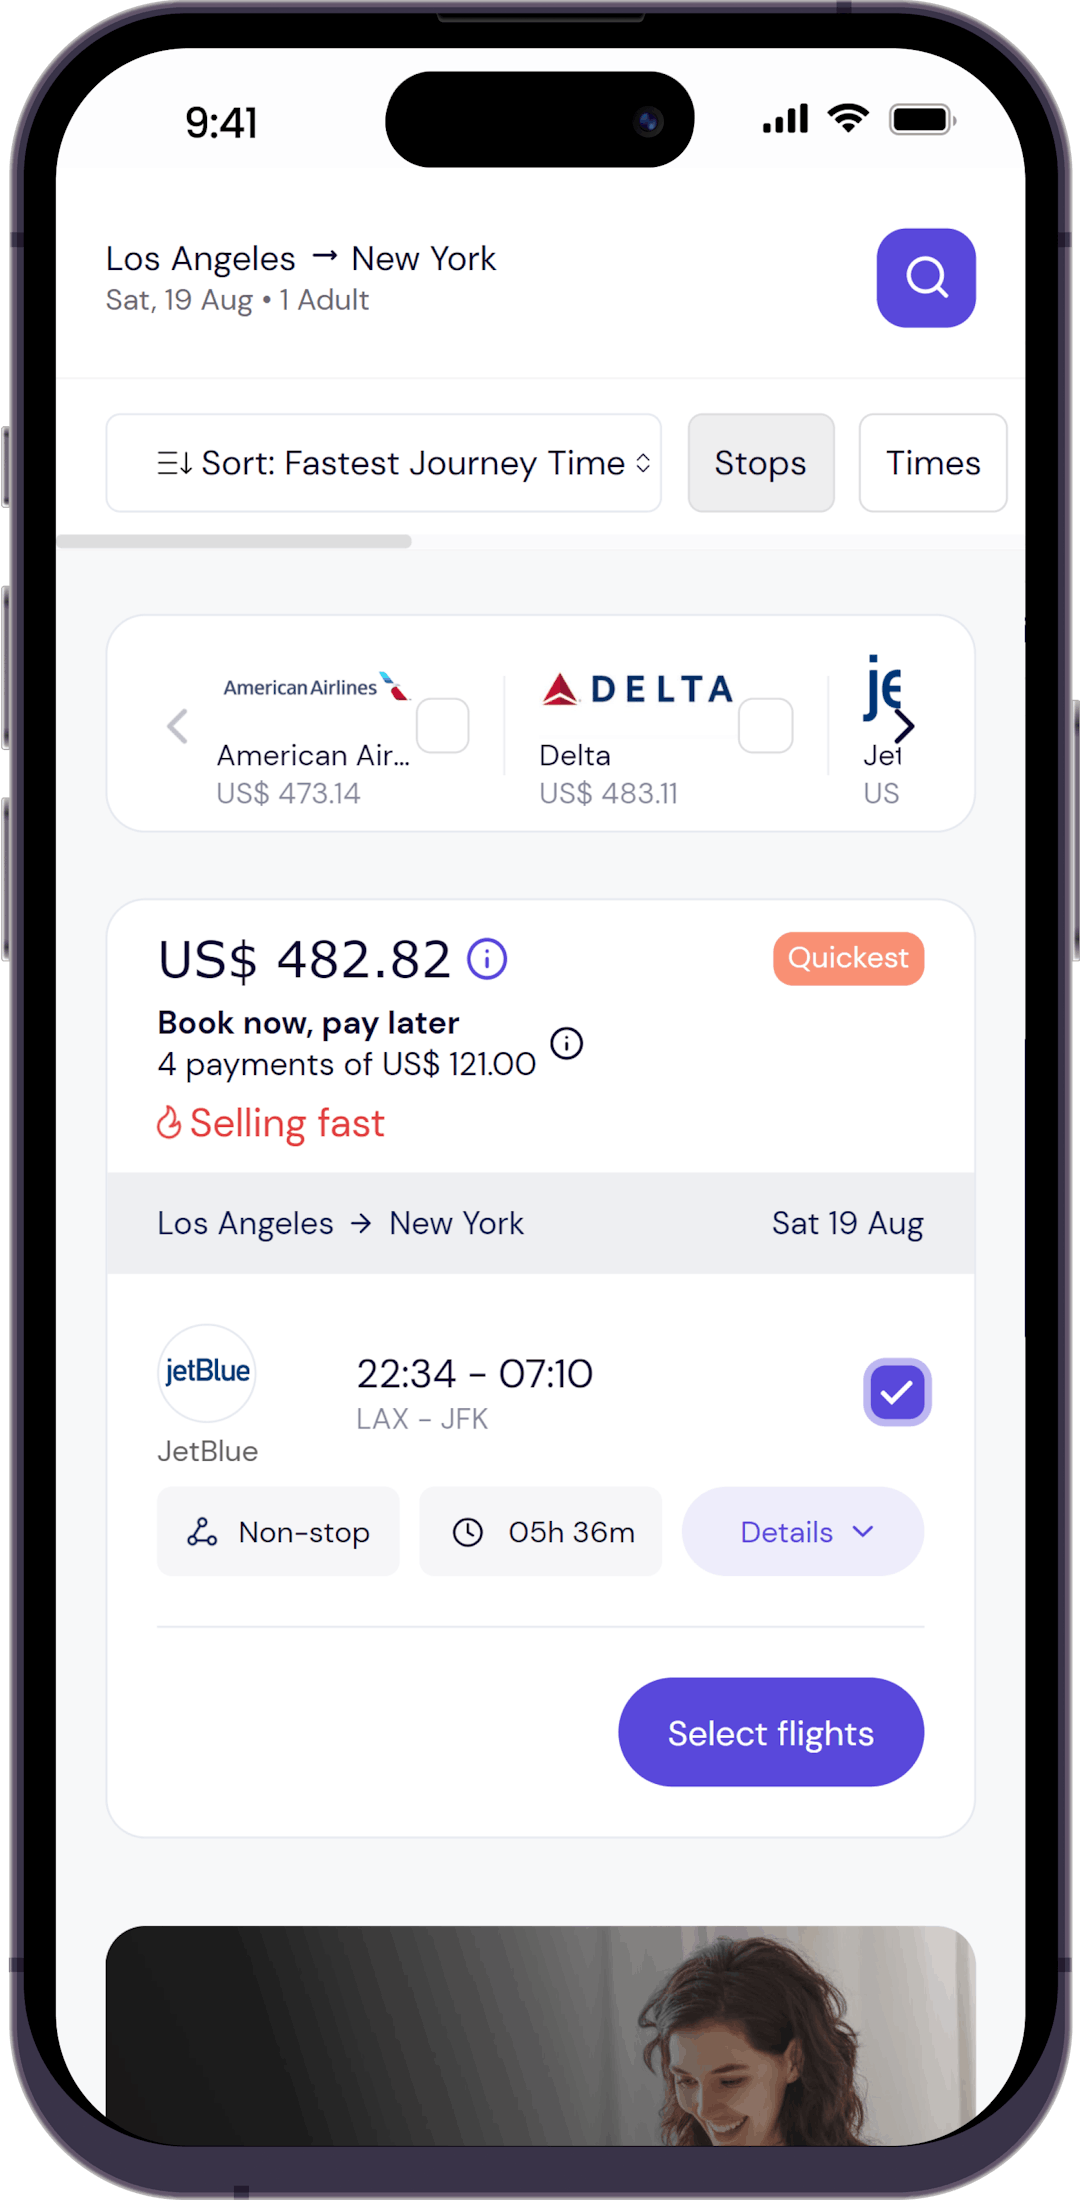 Step 2 - Select last-minute flight that you want to book